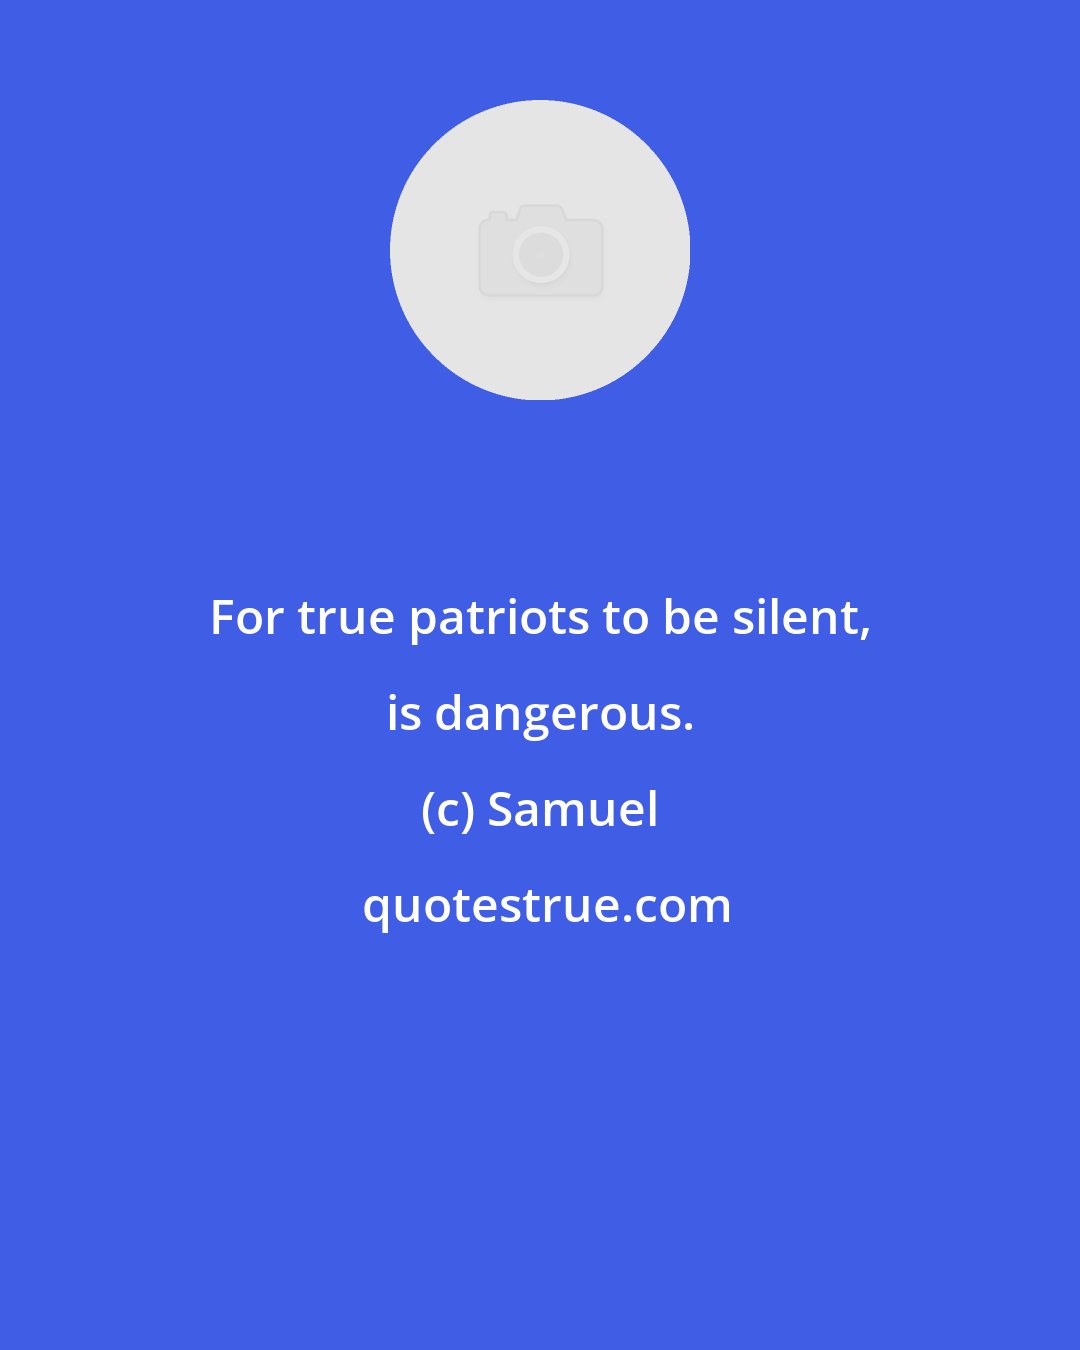 Samuel: For true patriots to be silent, is dangerous.